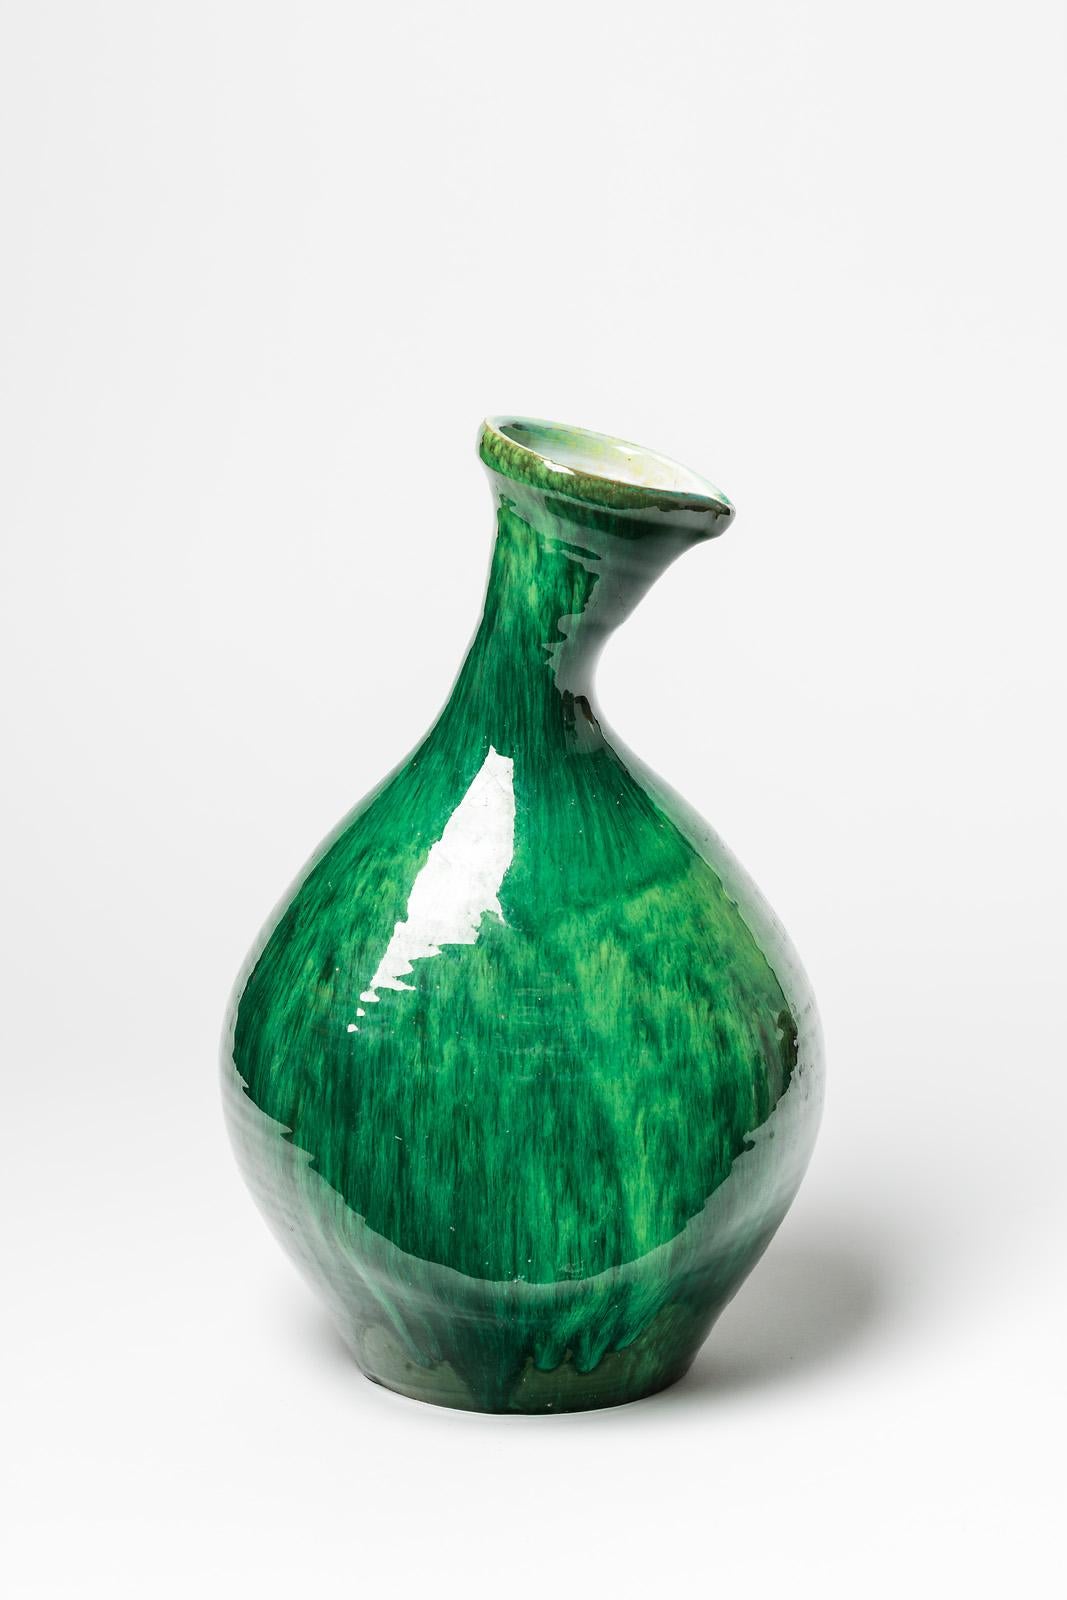 Mid-Century Modern Green and White Free Form Ceramic Vase circa 1950 French Design Style of Madoura For Sale